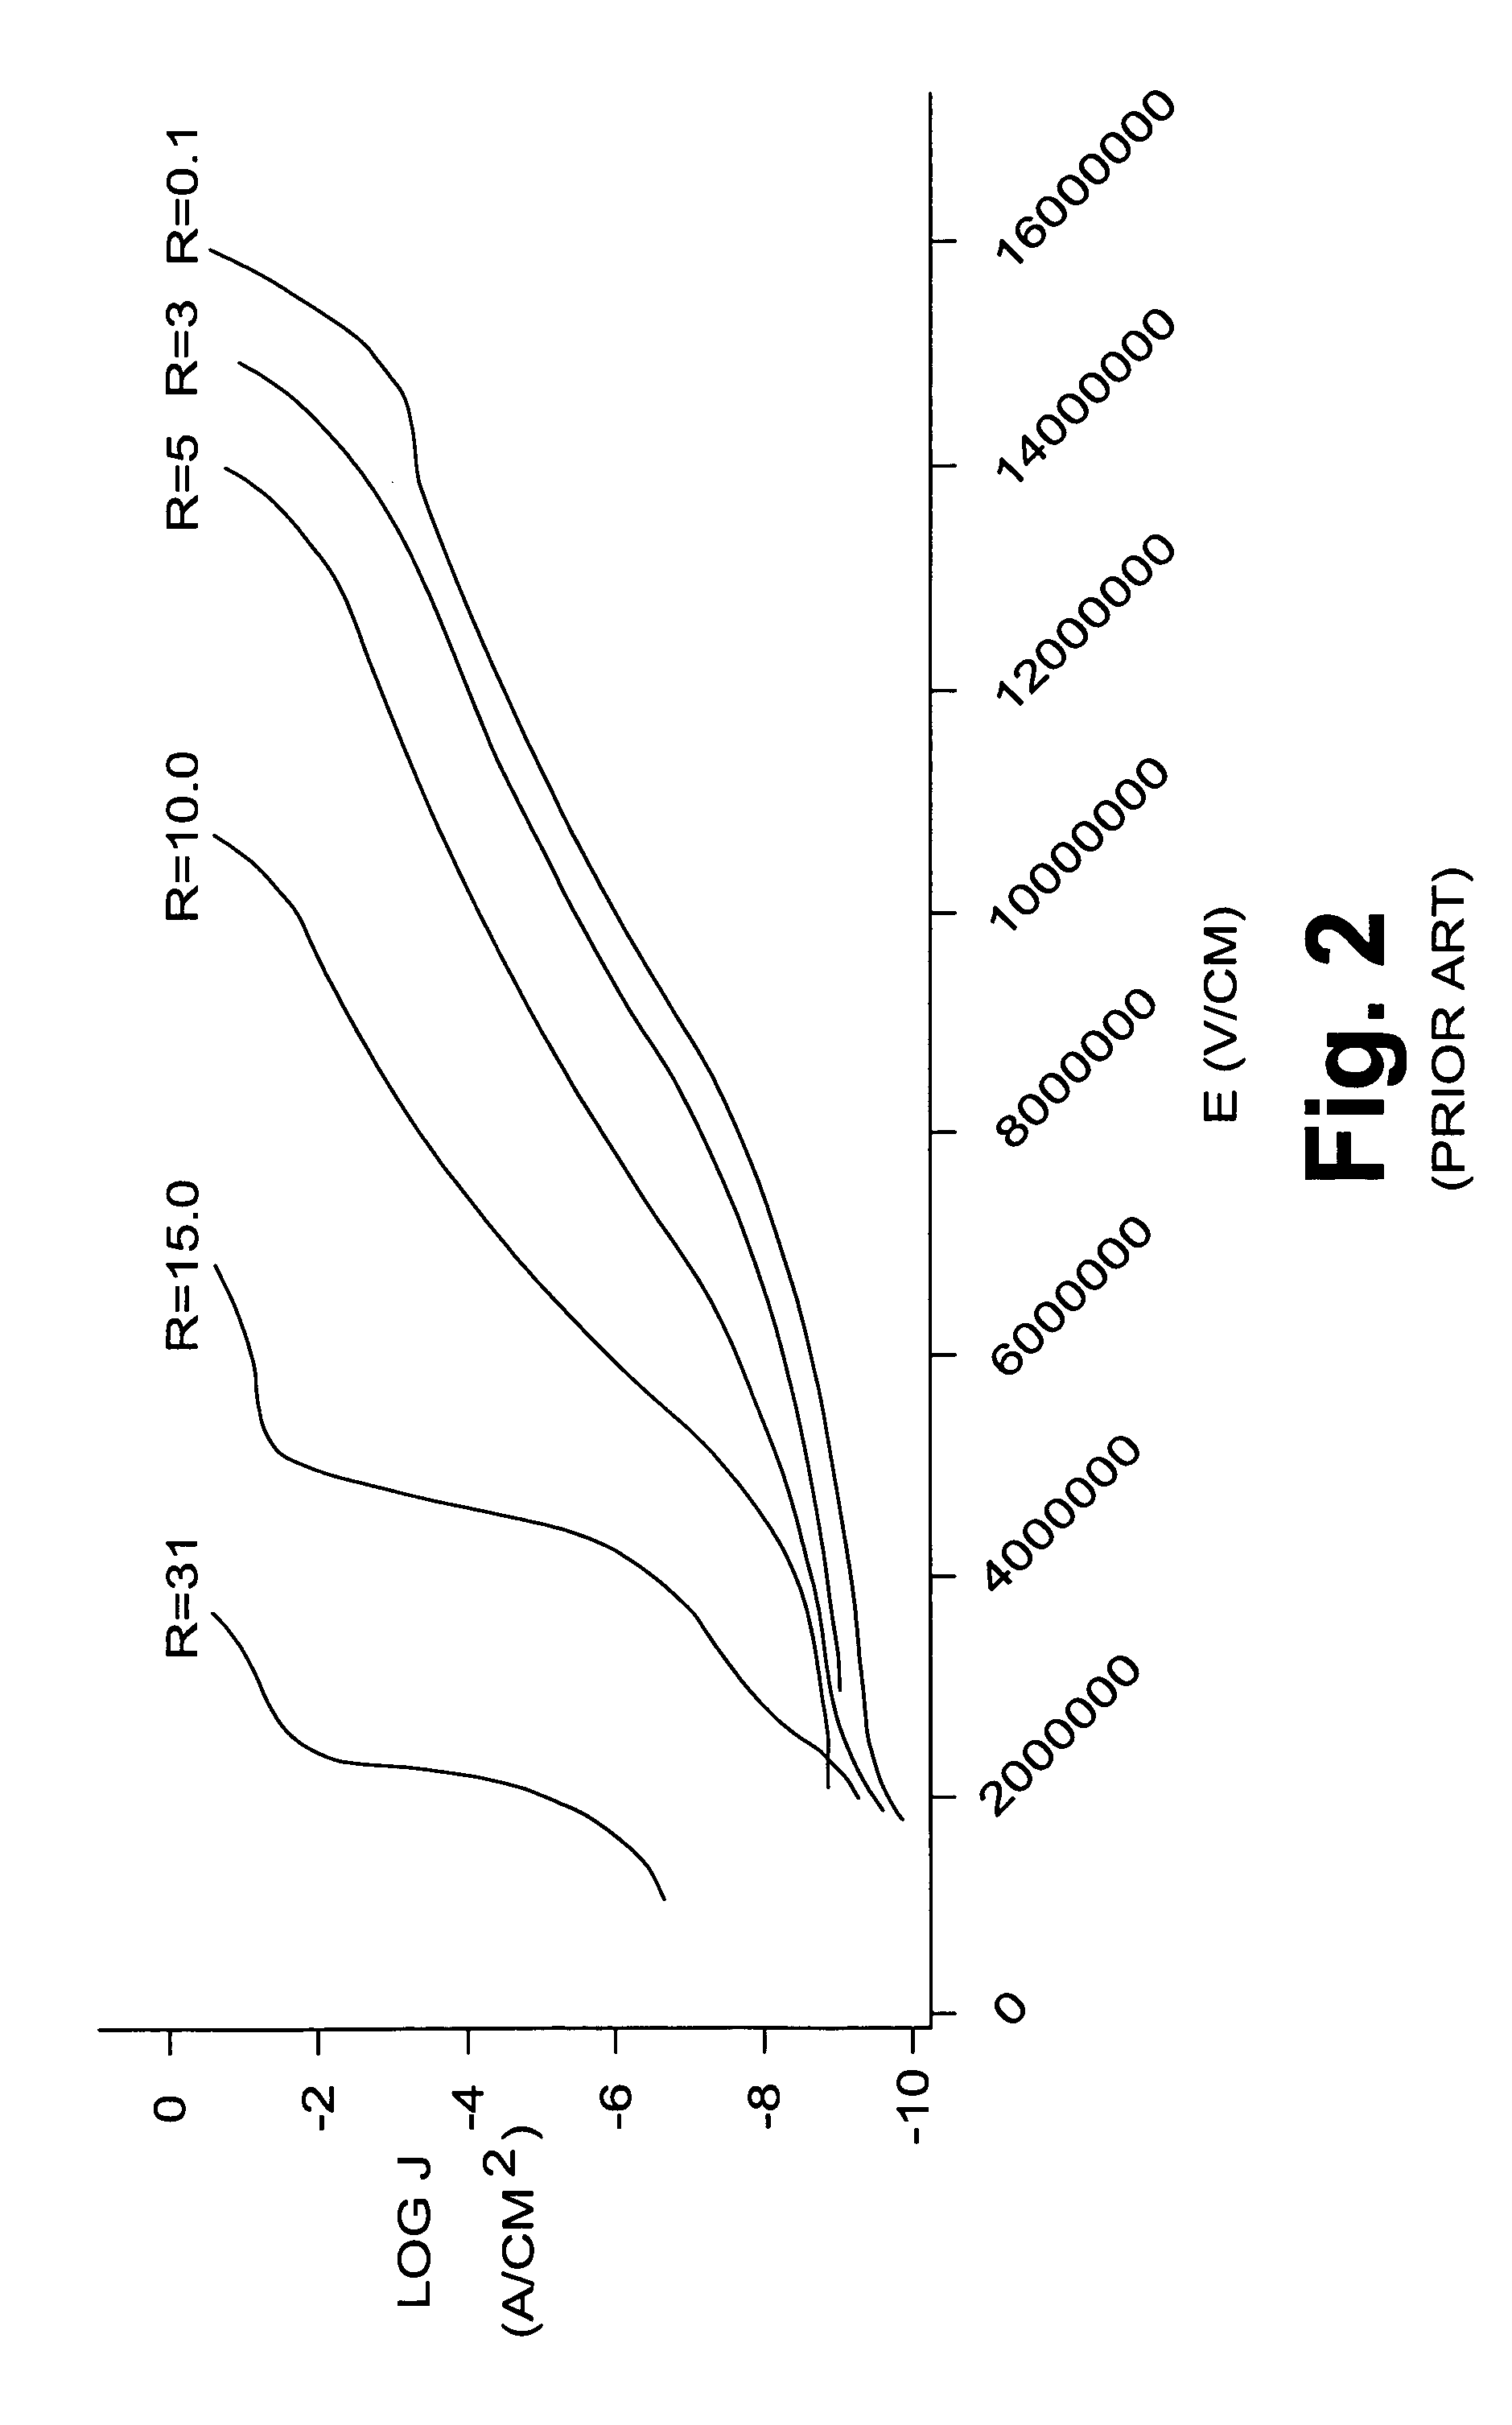 Decoupling capacitor for high frequency noise immunity